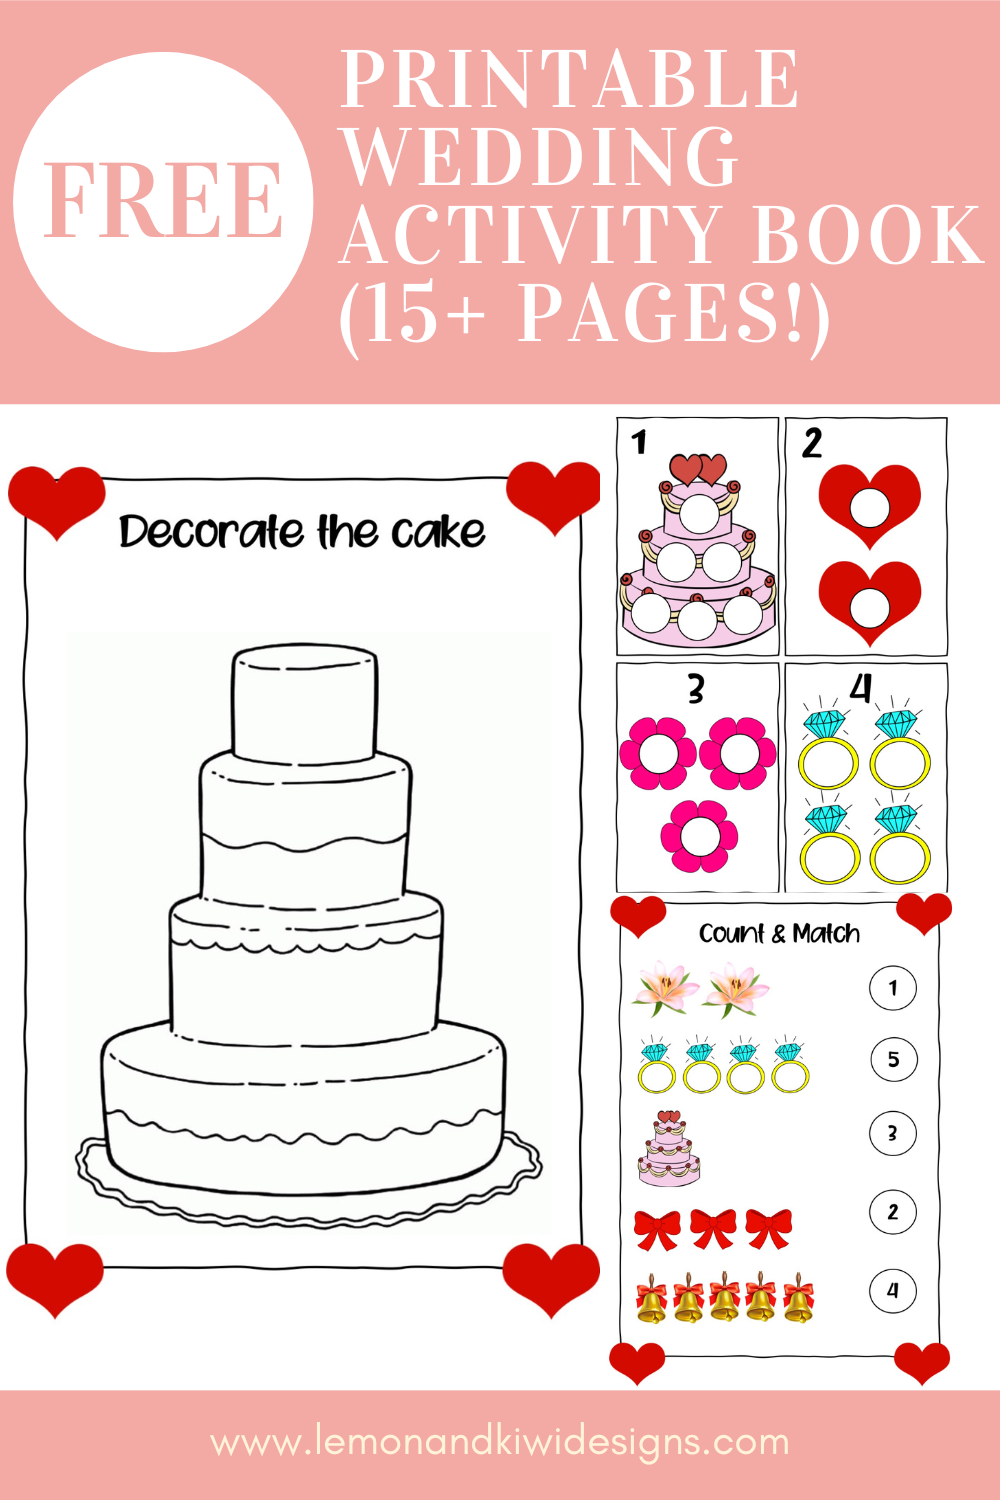 Free printable Wedding activity book for kids